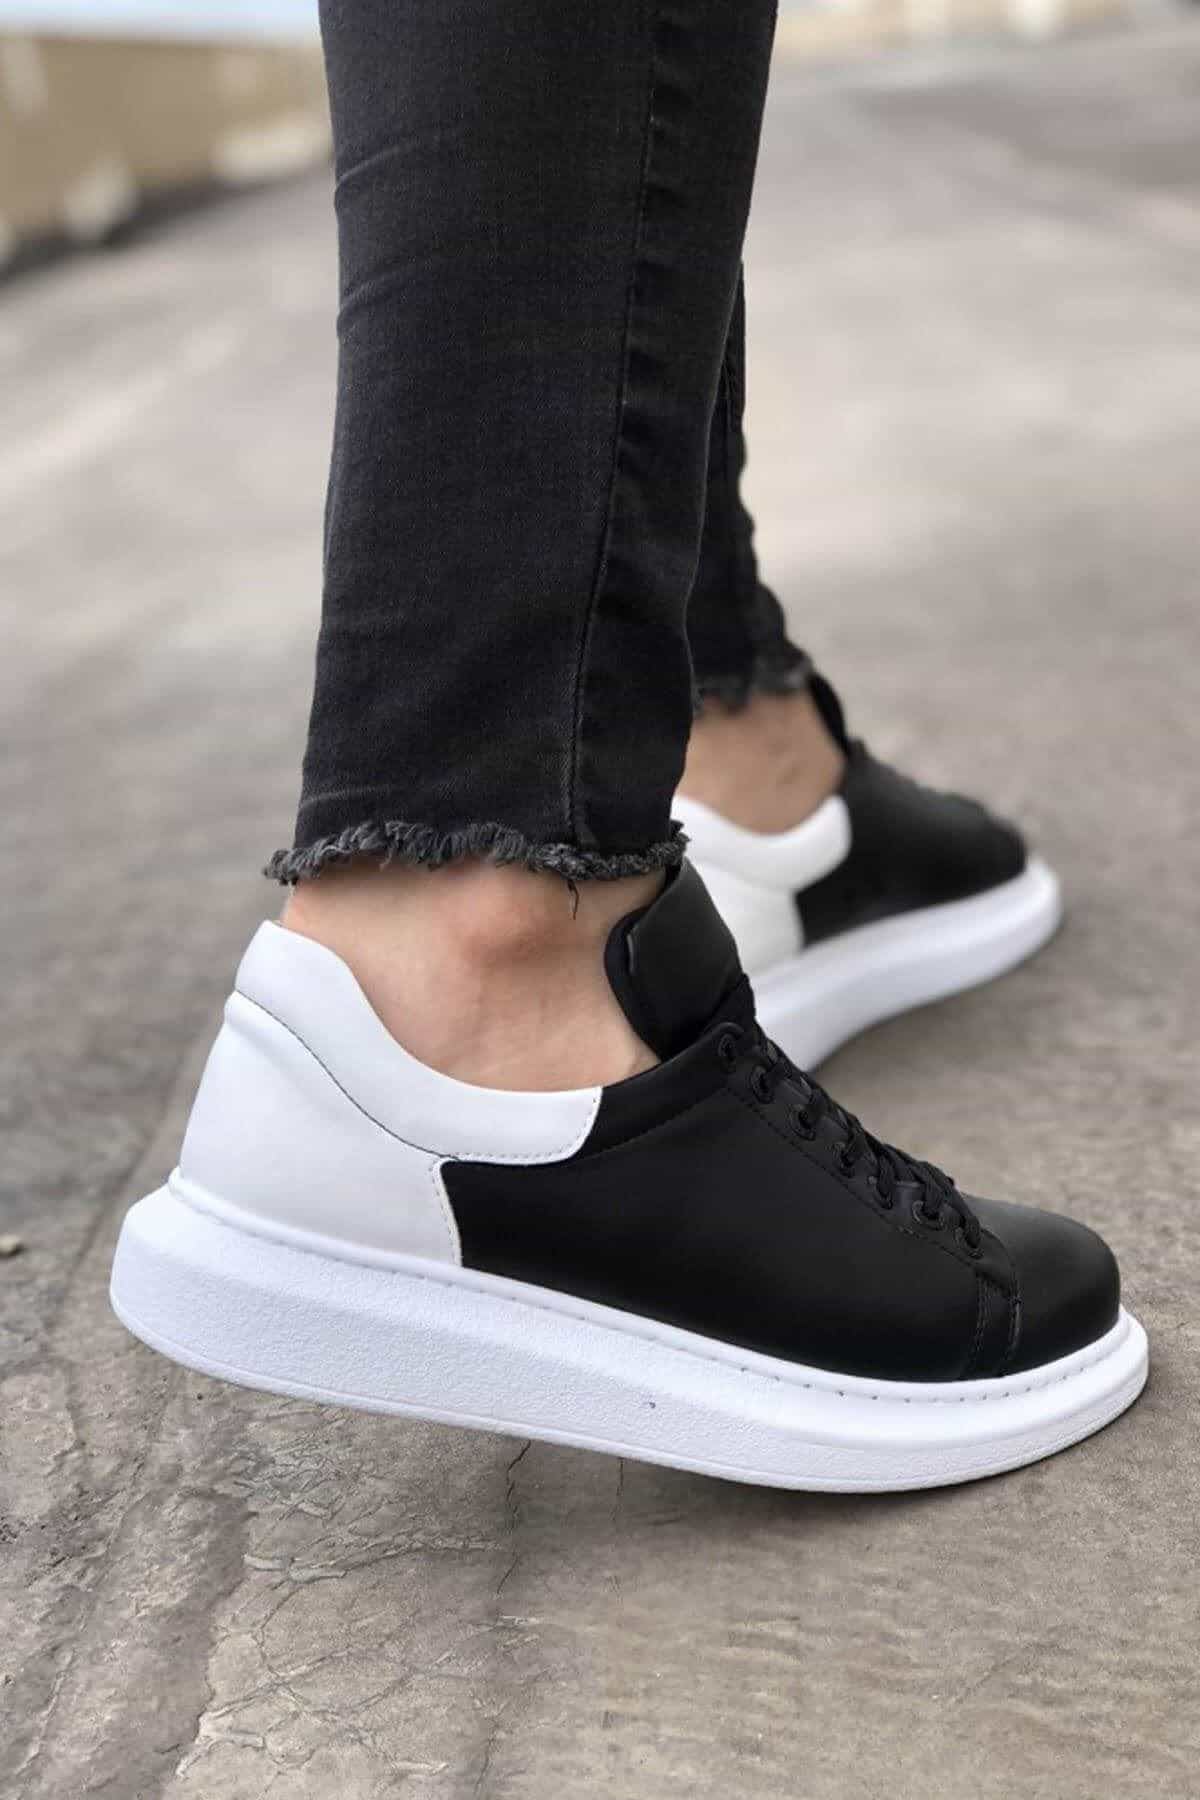 Chekich Men's & Women's Shoes White and Black Artificial Leather Casual Unisex Sneakers Comfortable 2021 Fashion Wedding Orthopedic Walking Sport Odorless Lightweight Breathable Male Female Lovers Couples Suits CH256